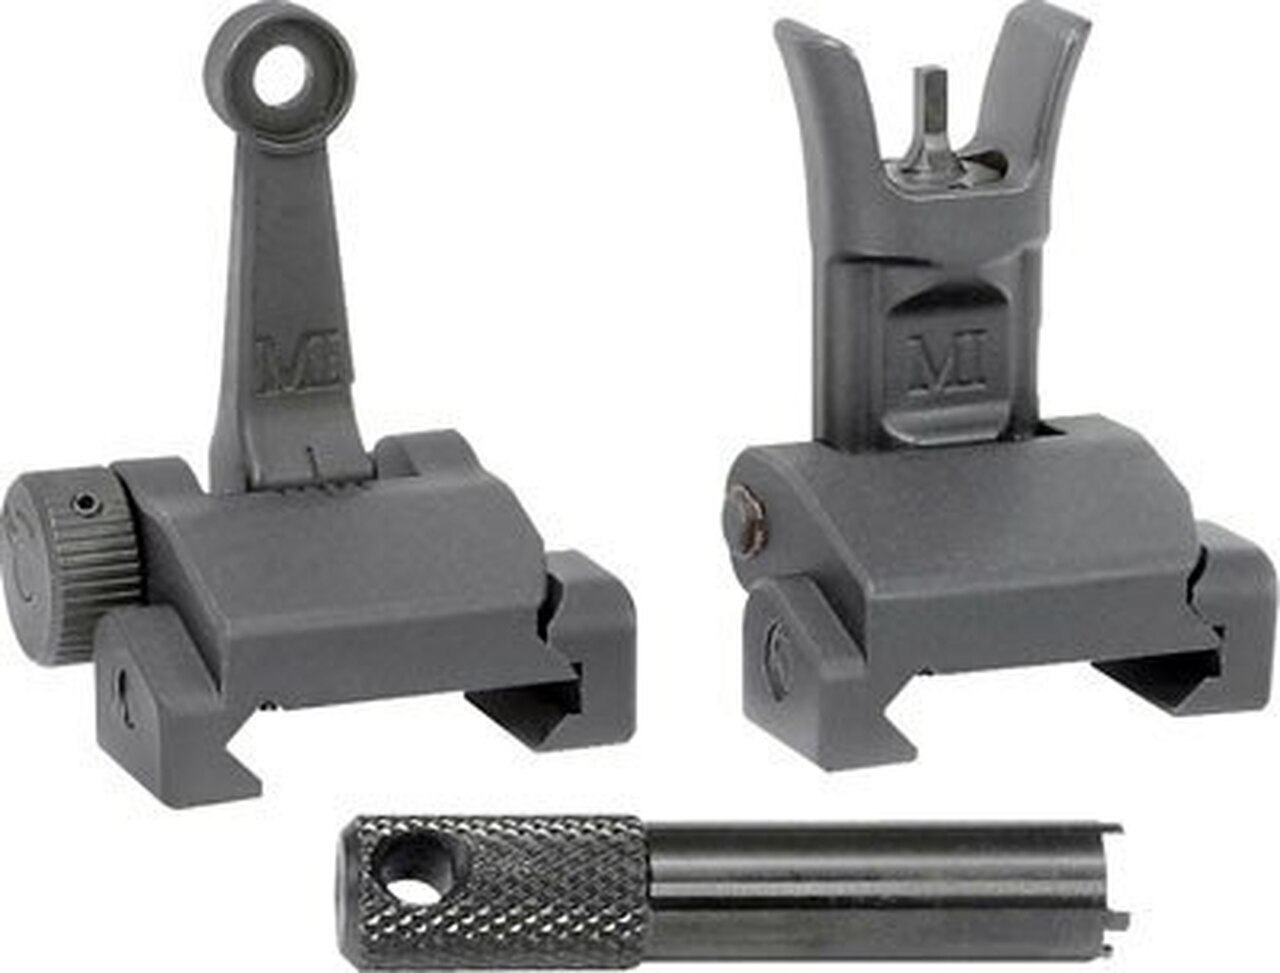 Image of Midwest Combat Rifle Sight Set, Adjustable Front and Rear Sight, Low Profile, Flip-Up, Includes A2 Sight Tool, Black